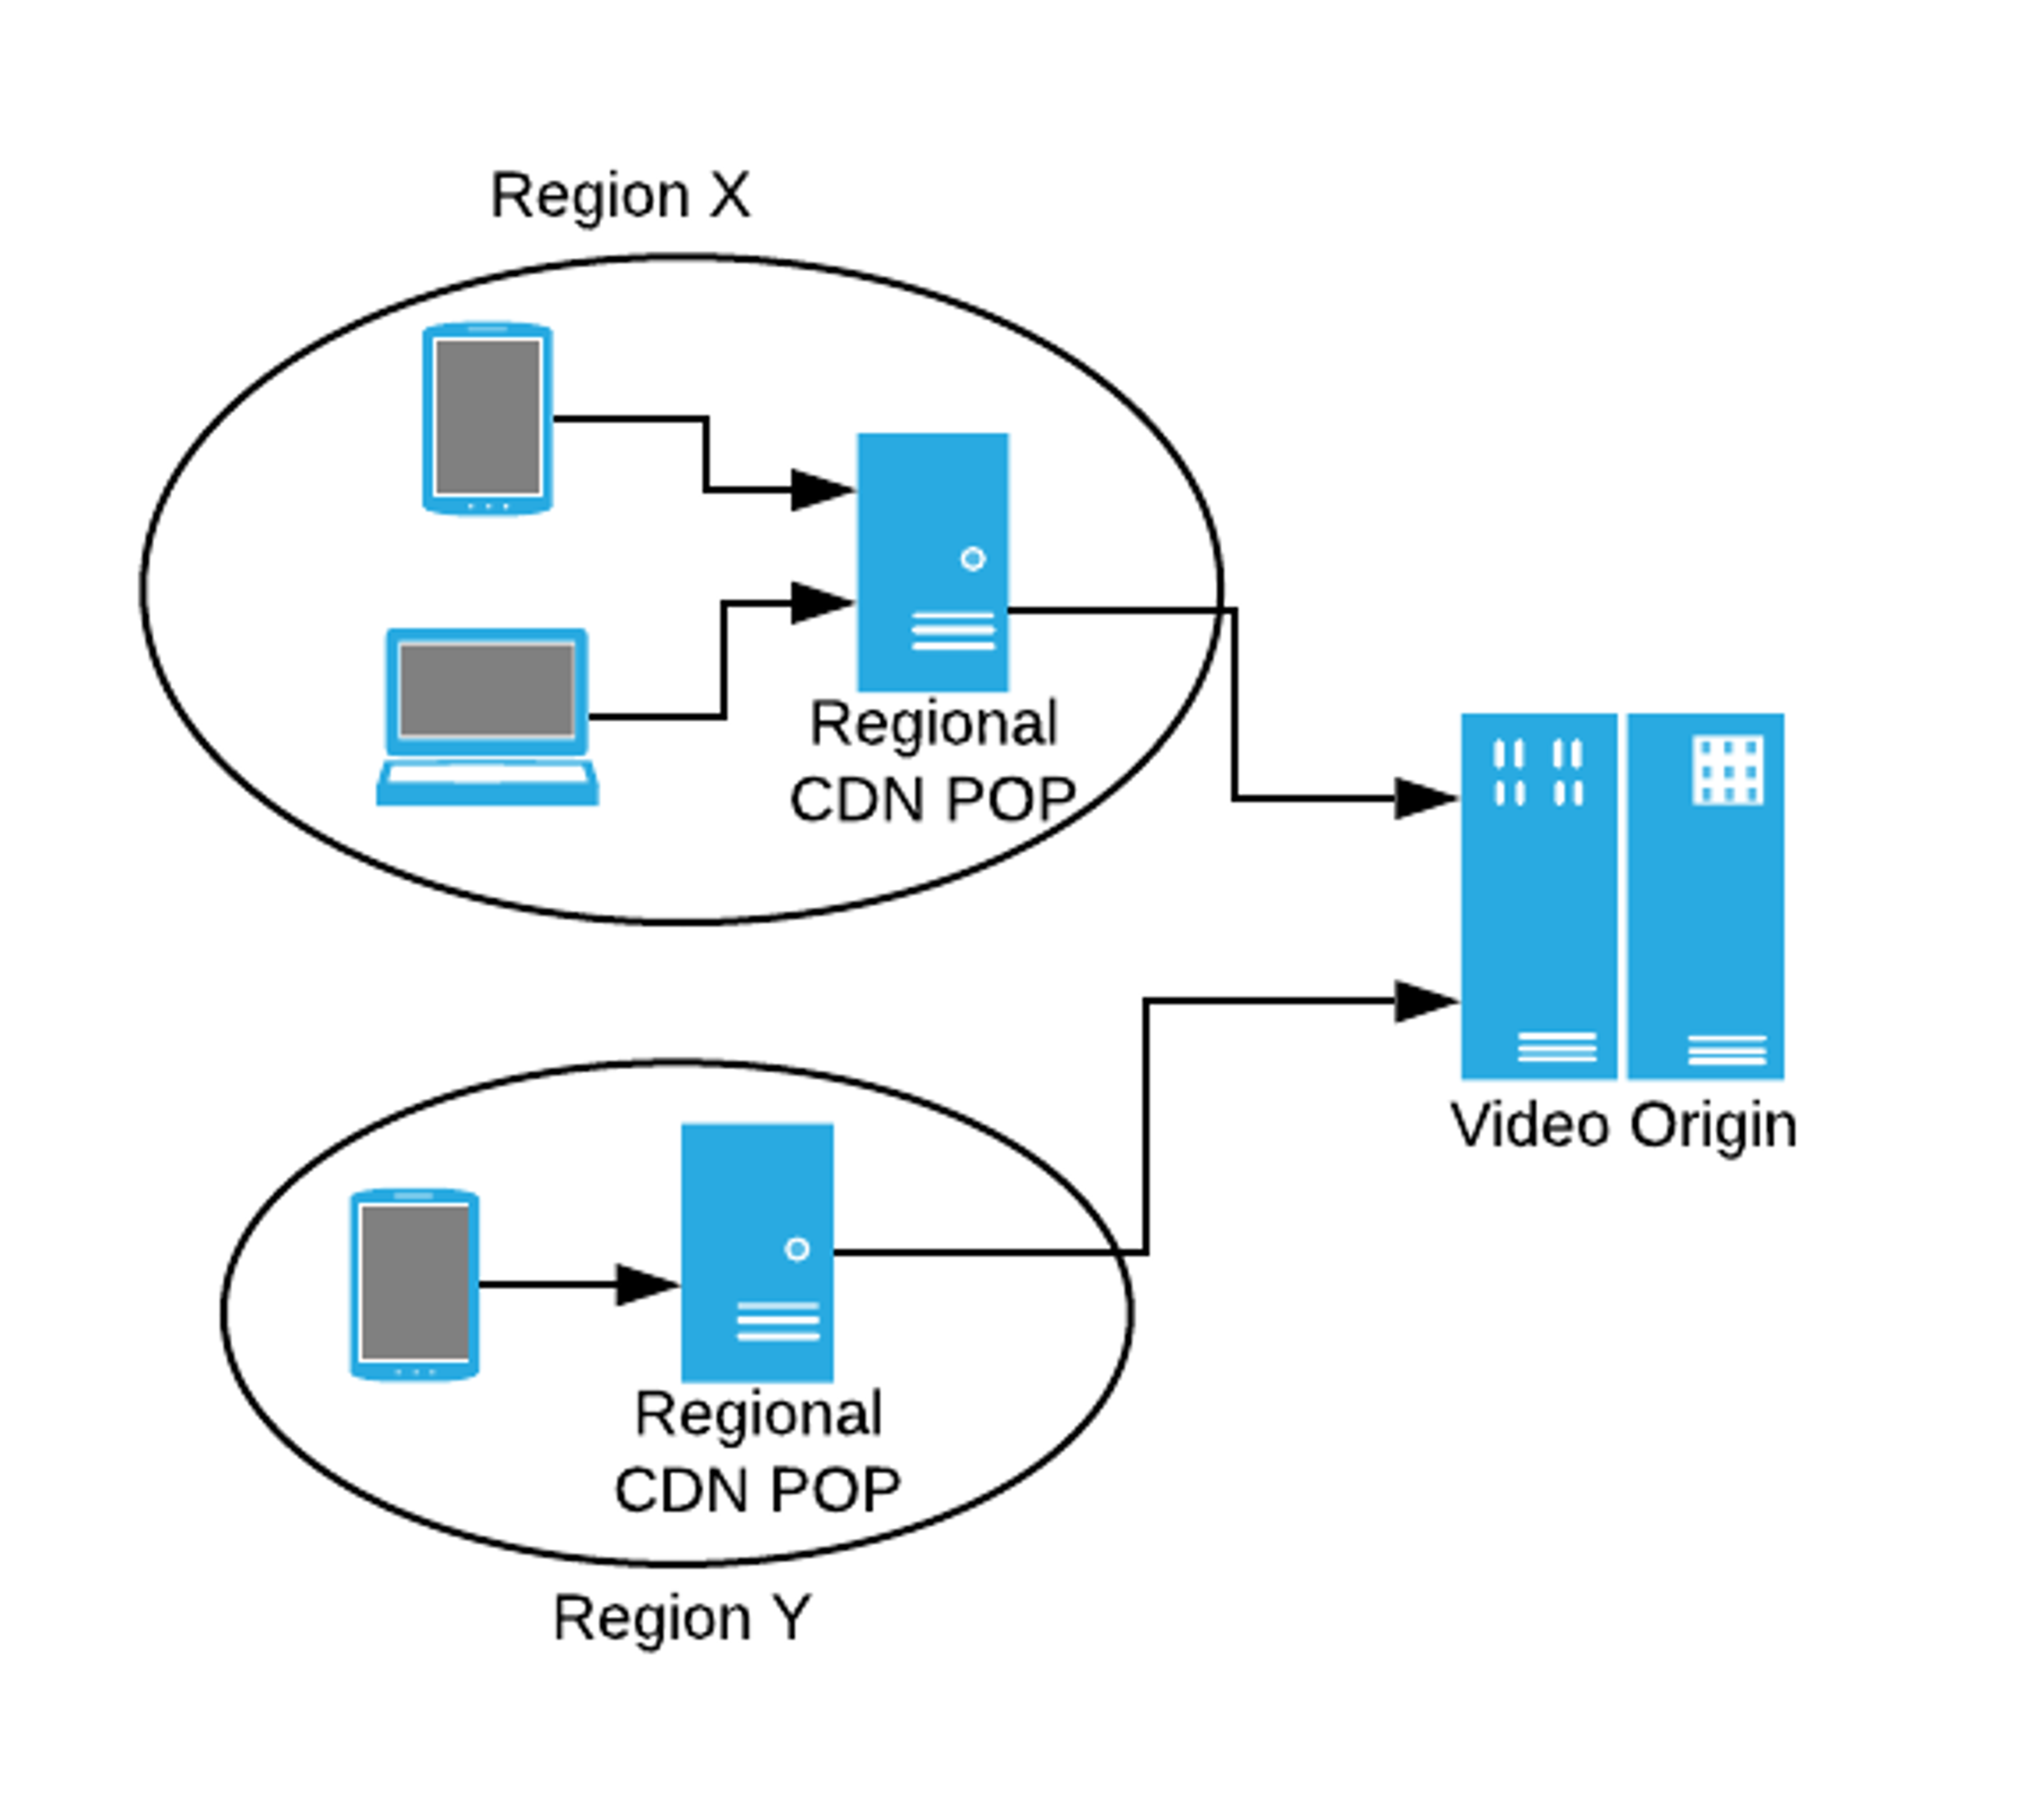 Diagram showing two regions with their own CDN POPs that access the Video Origin